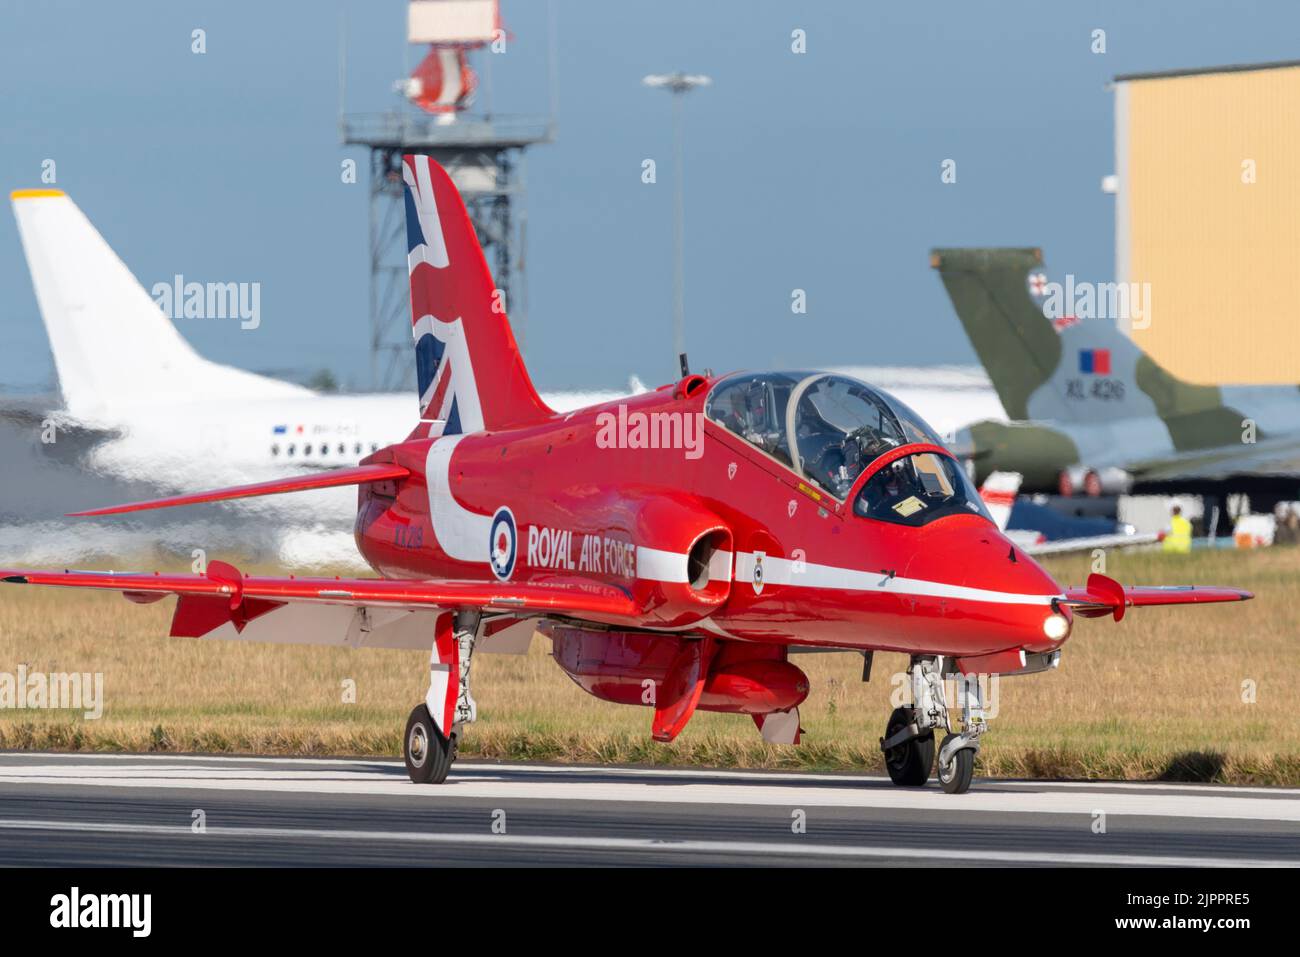 Royal Air Force Red Arrows display team BAe Hawk T.1 jet plane after landing at London Southend Airport for weekend of airshows. Taxiing on runway Stock Photo